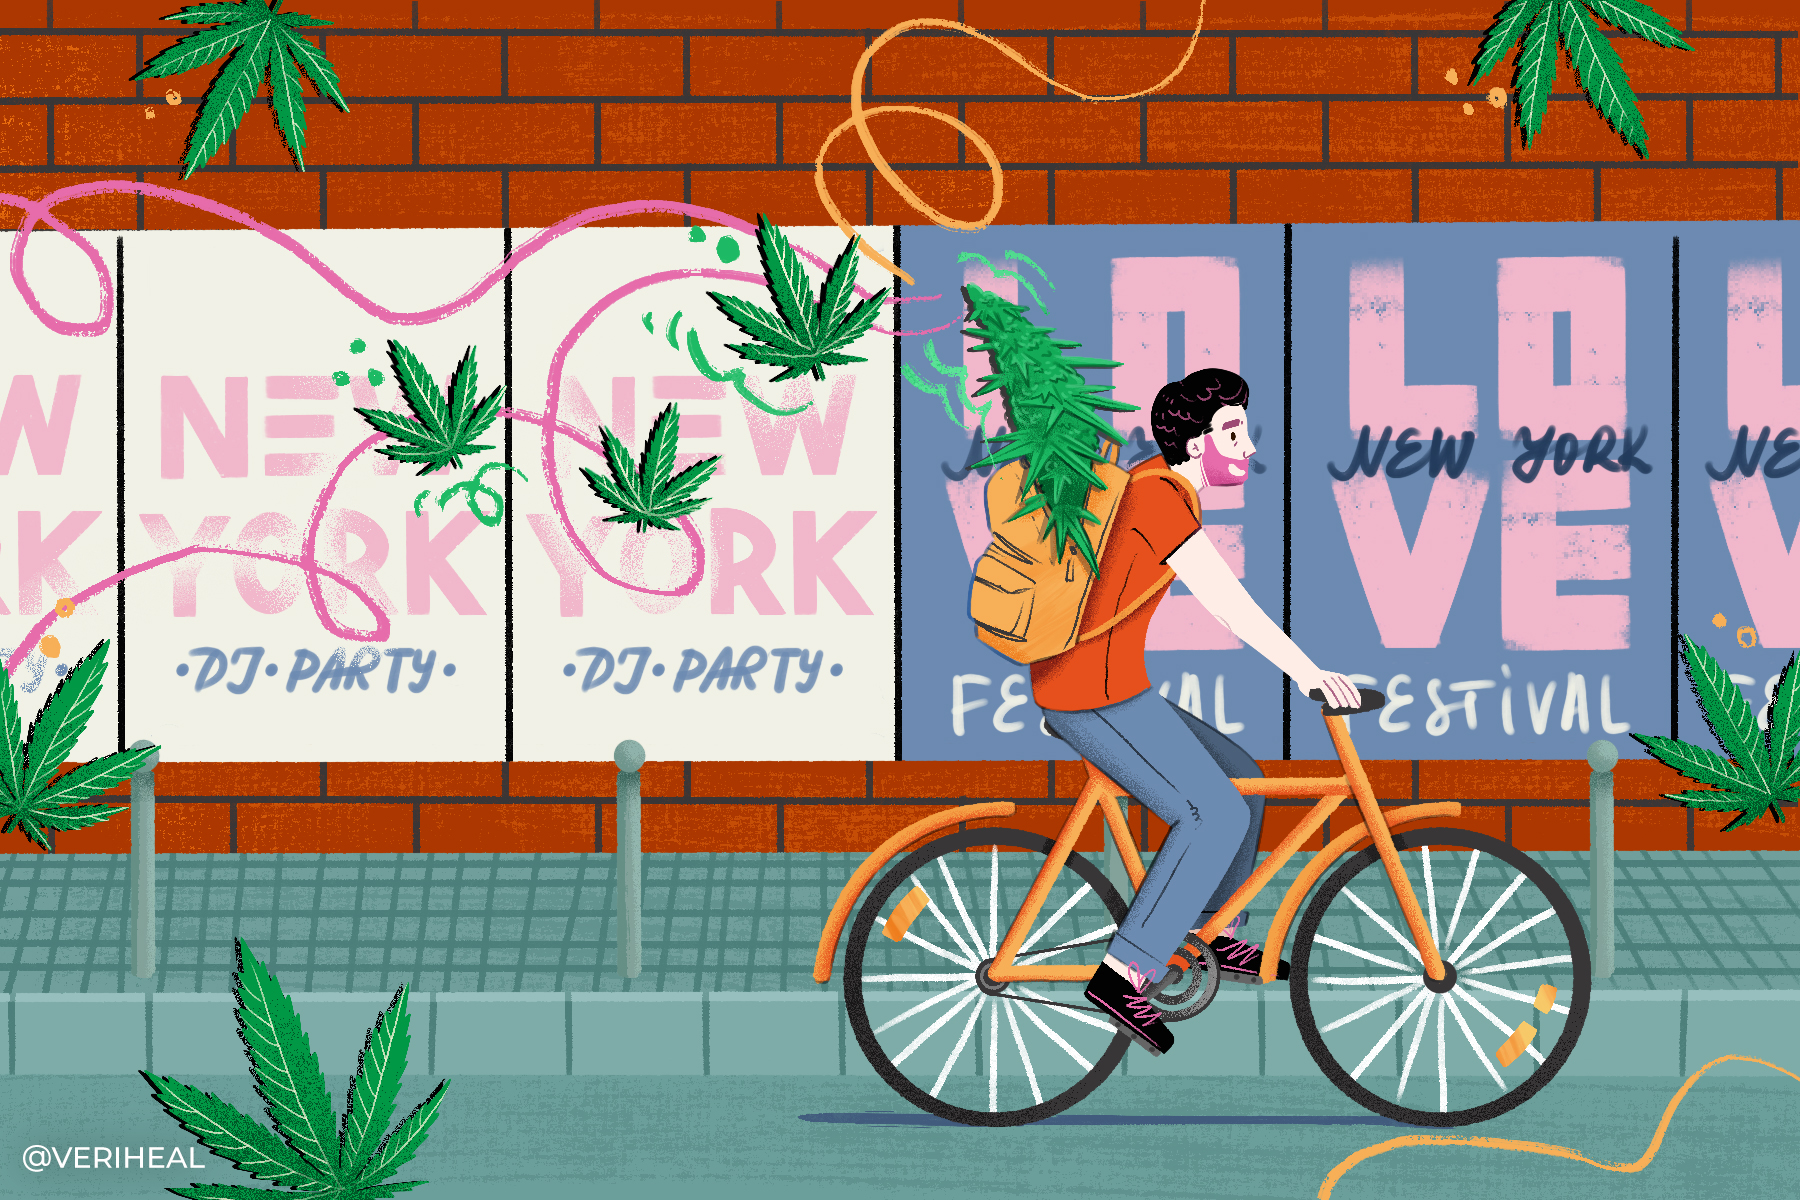 New York to Allow for Cannabis Deliveries Prior to Storefronts Opening